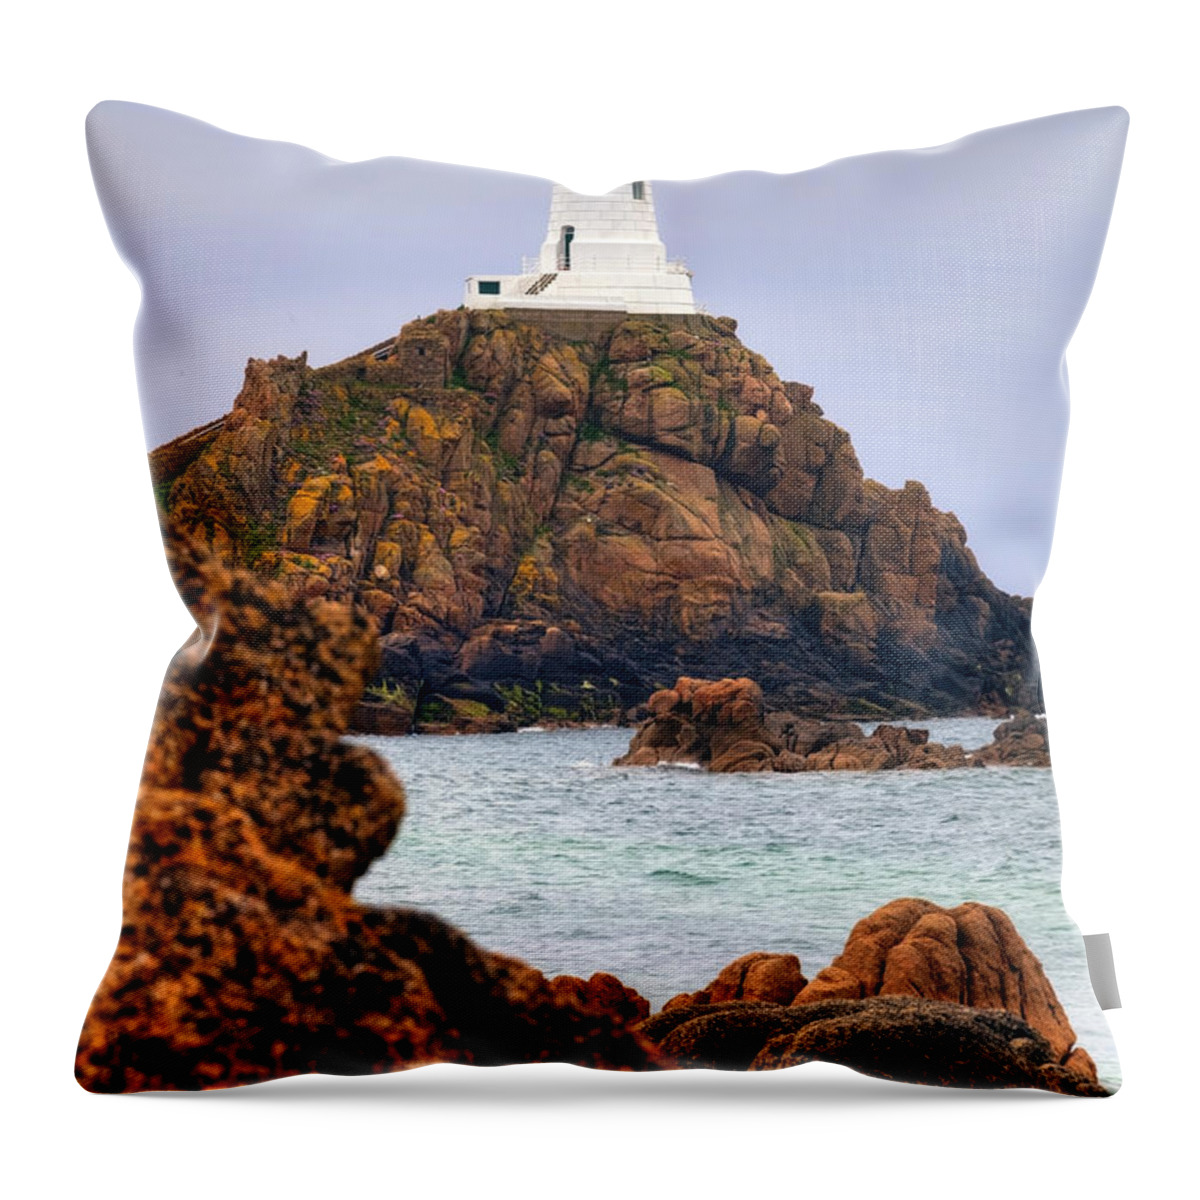 La Corbiere Lighthouse Throw Pillow featuring the photograph Corbiere Lighthouse - Jersey by Joana Kruse